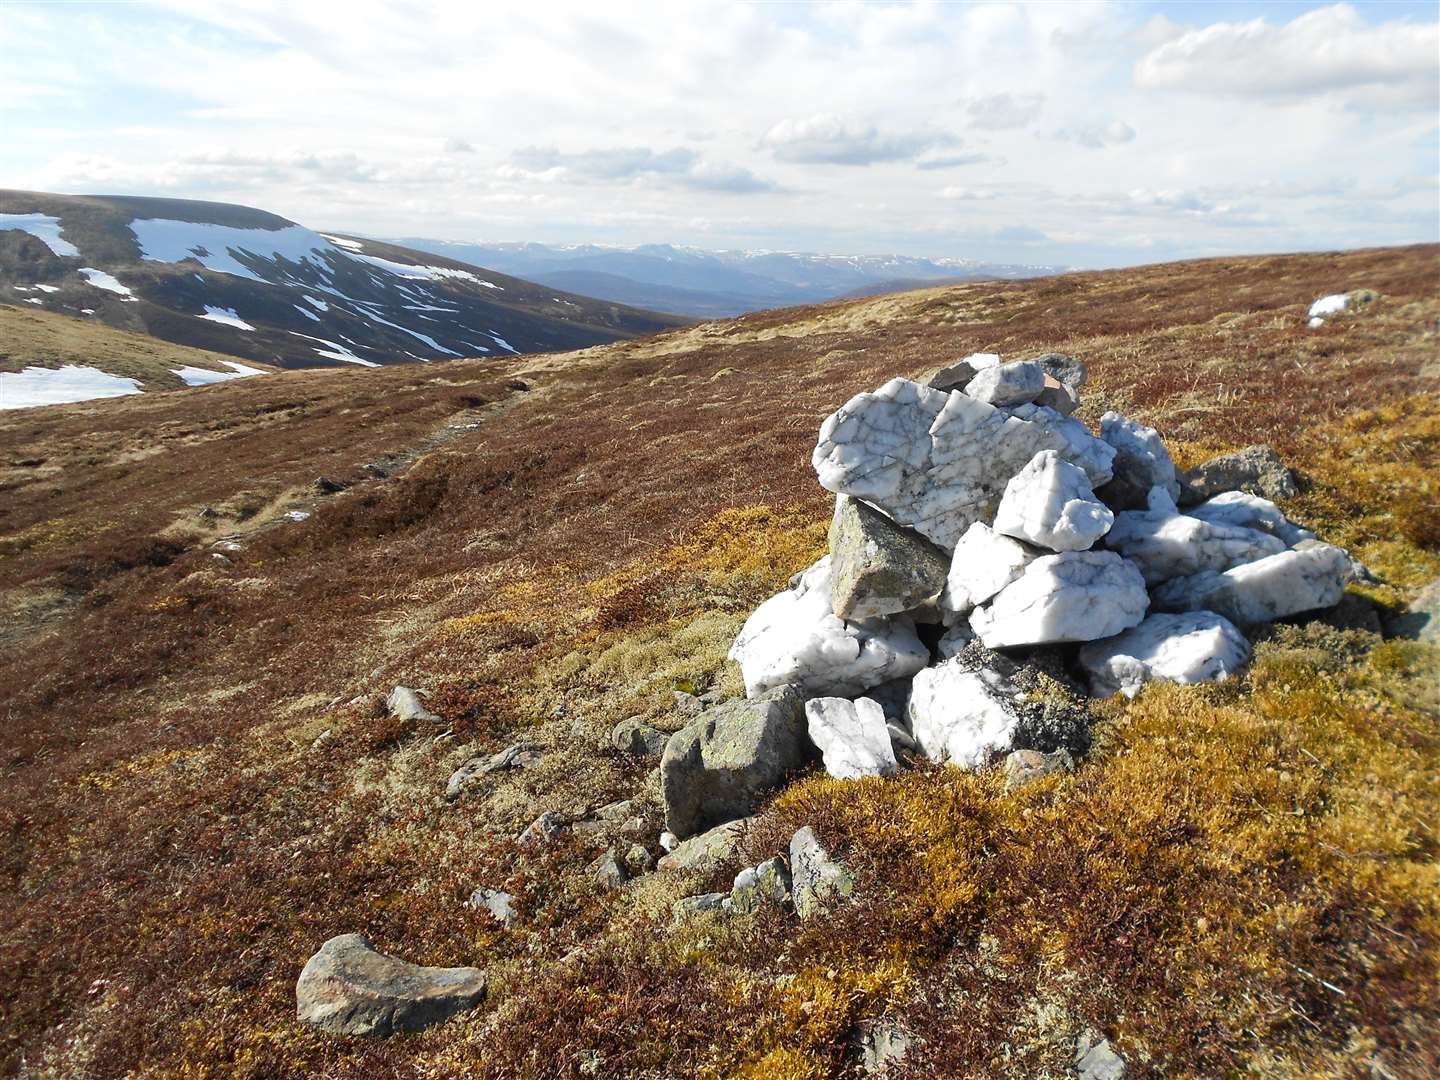 The quartzite cairn marking the pass.